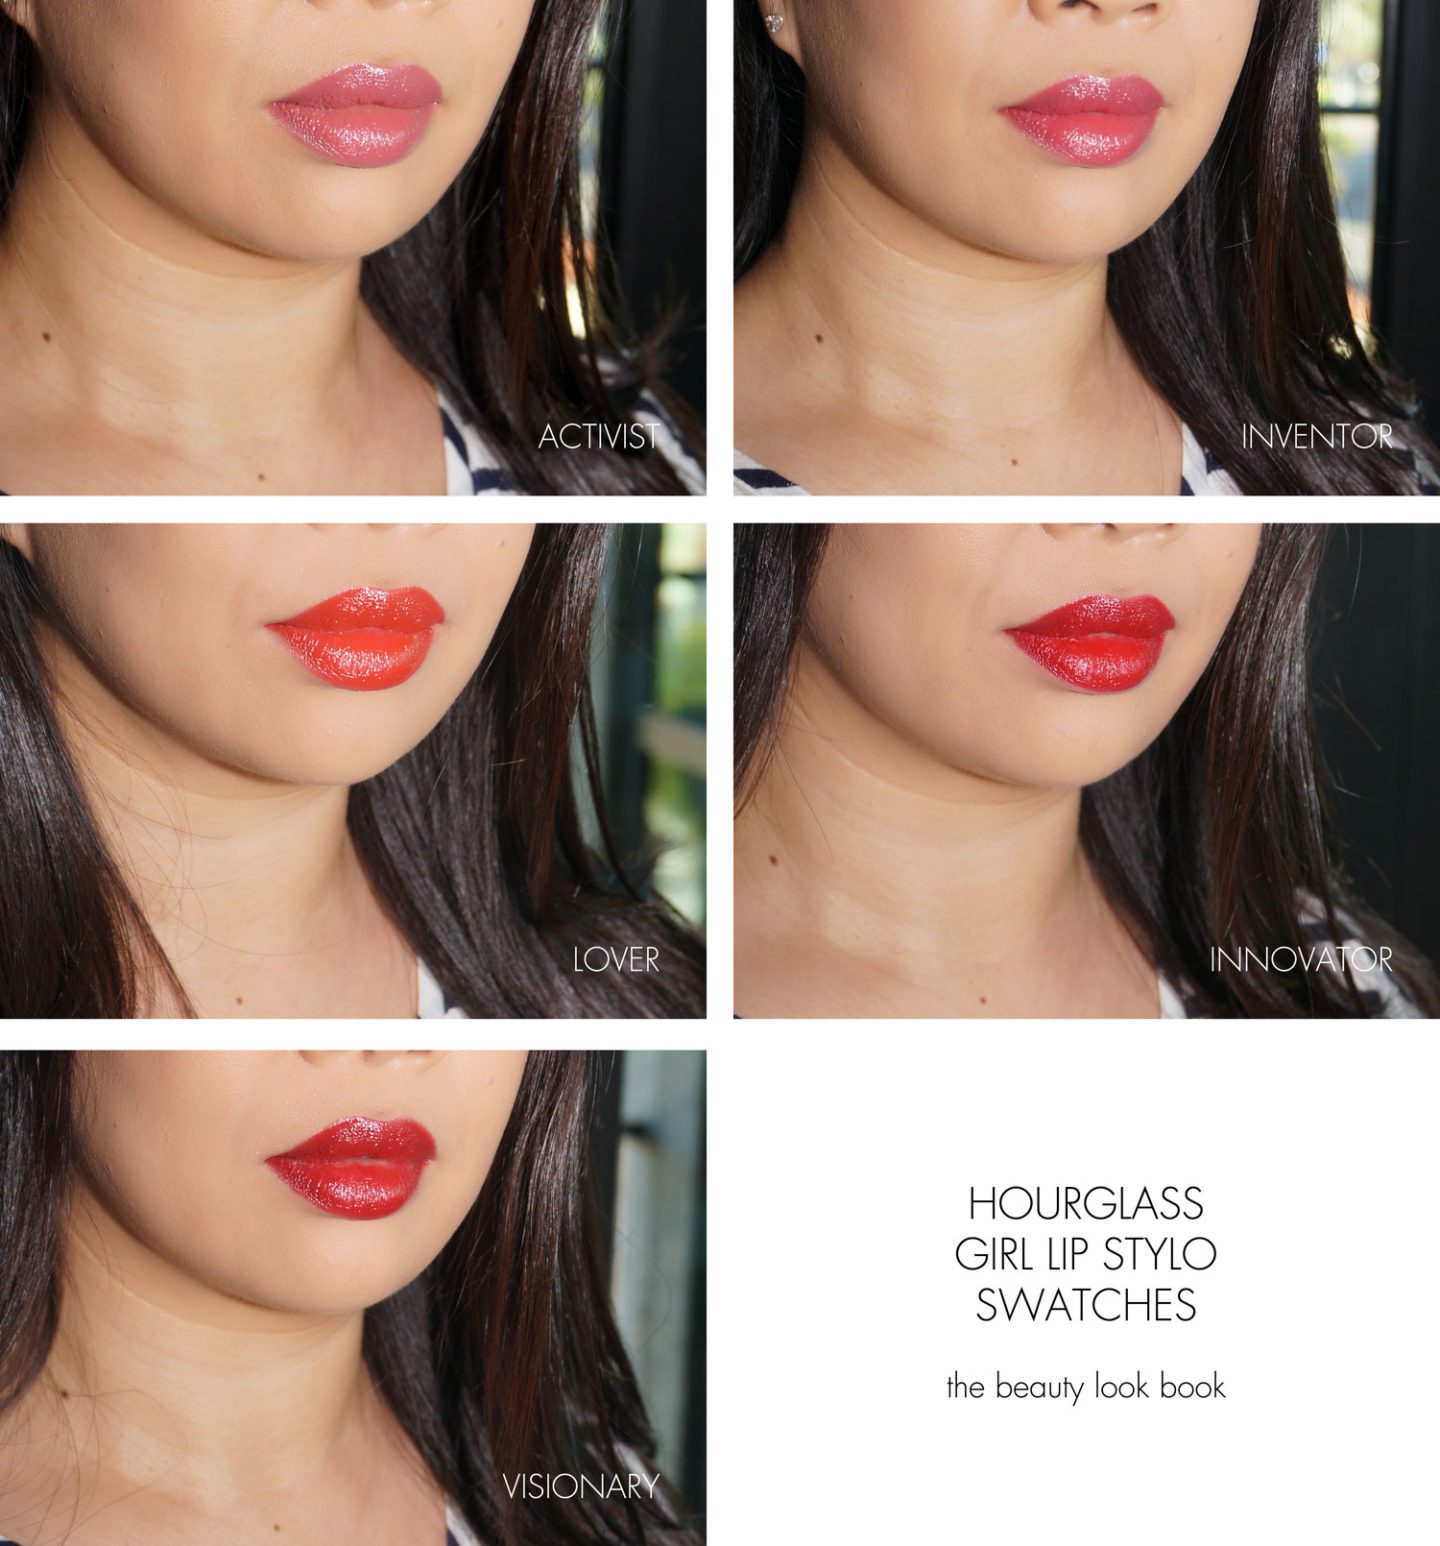 Hourglass GIRL Lip Stylo Lip Swatches Activist, Inventor, Lover, Innovator, Visionary | The Beauty Look Book